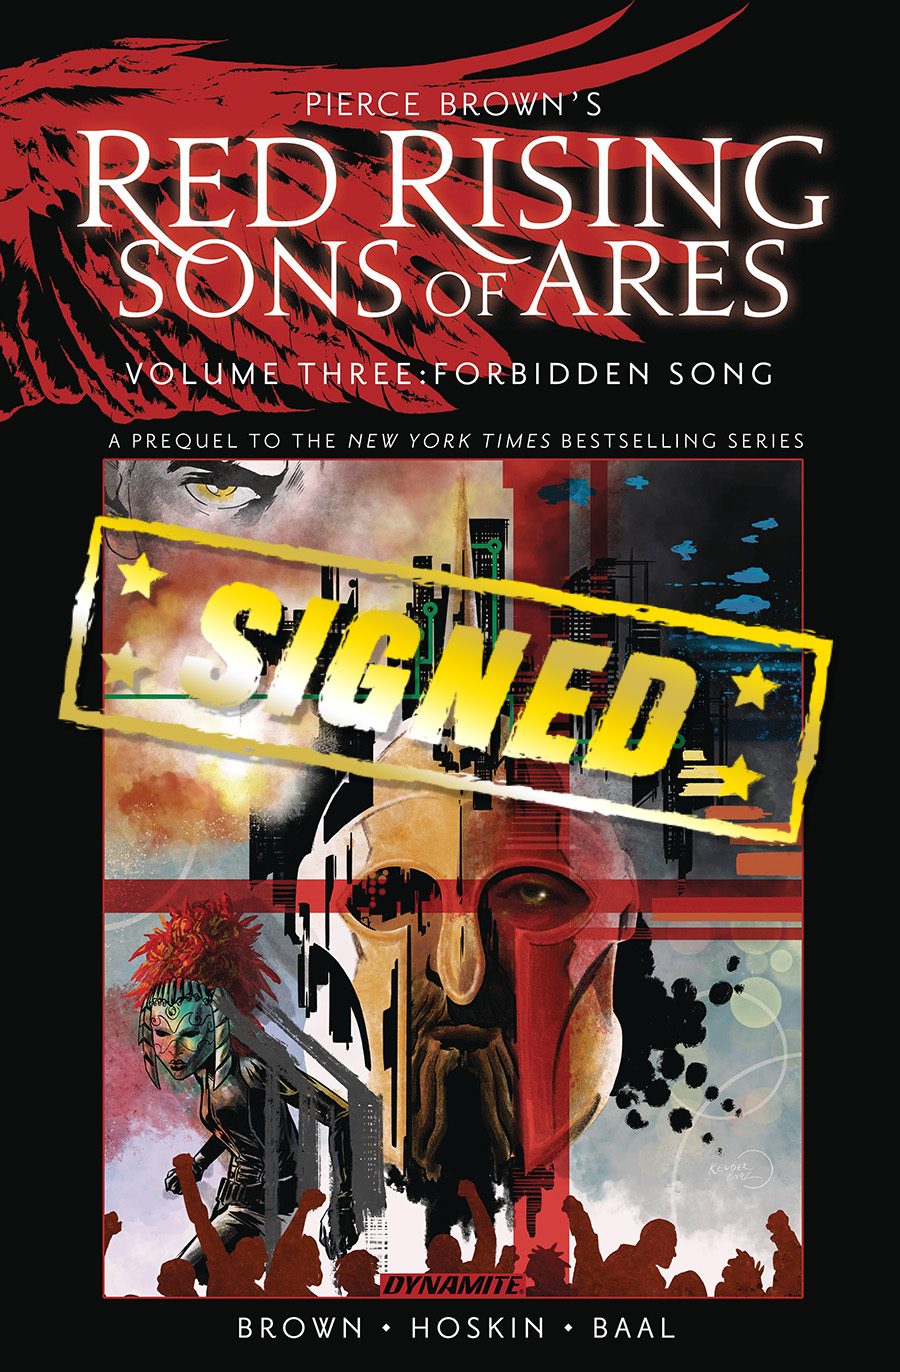 Pierce Browns Red Rising Sons Of Ares Vol 3 Forbidden Song HC Signed Edition